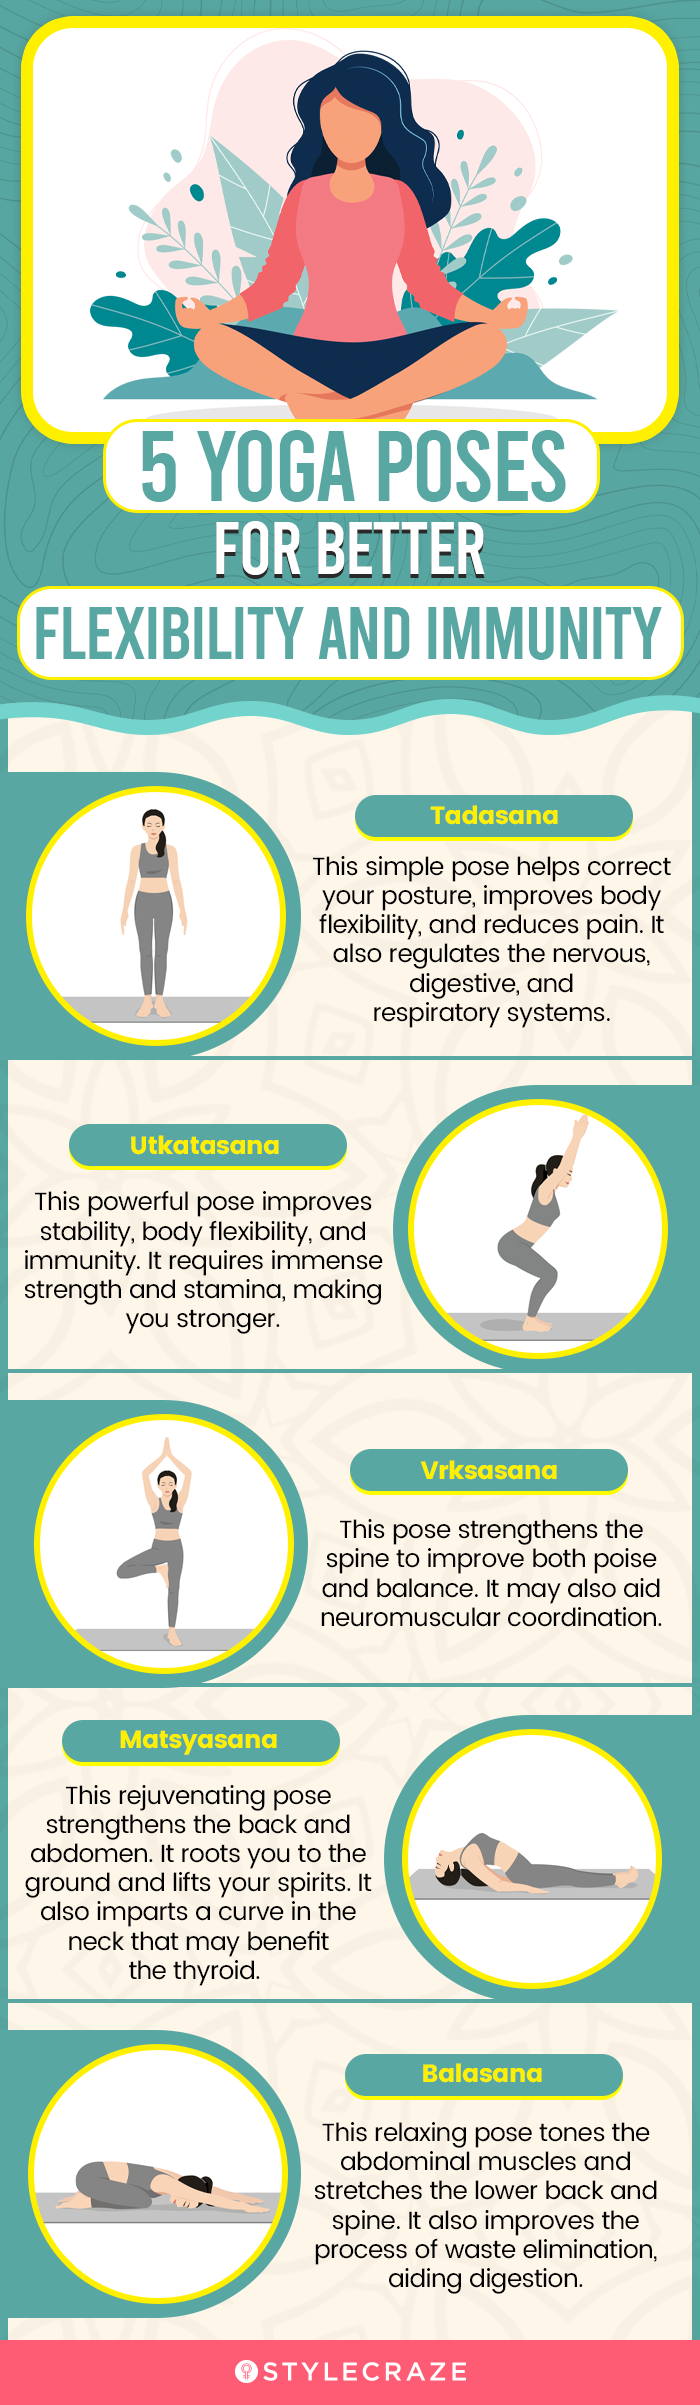 top 5 yoga poses for flexibility and immunity (infographic)